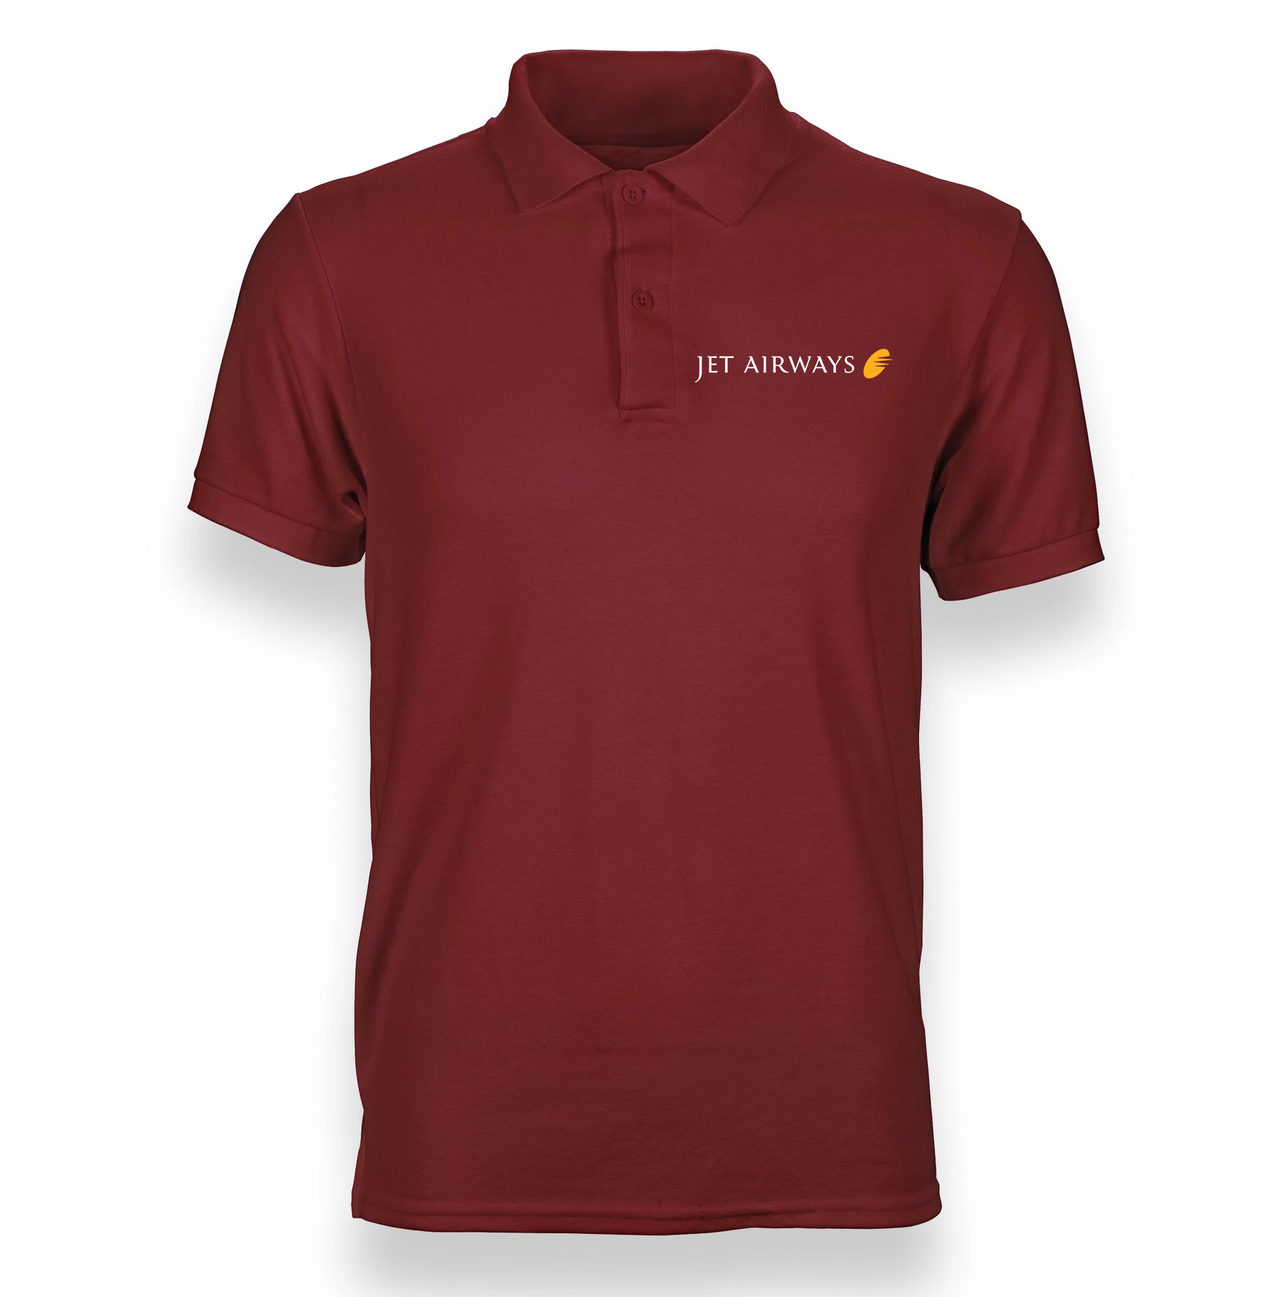 JET AIRLINES POLO T-SHIRT